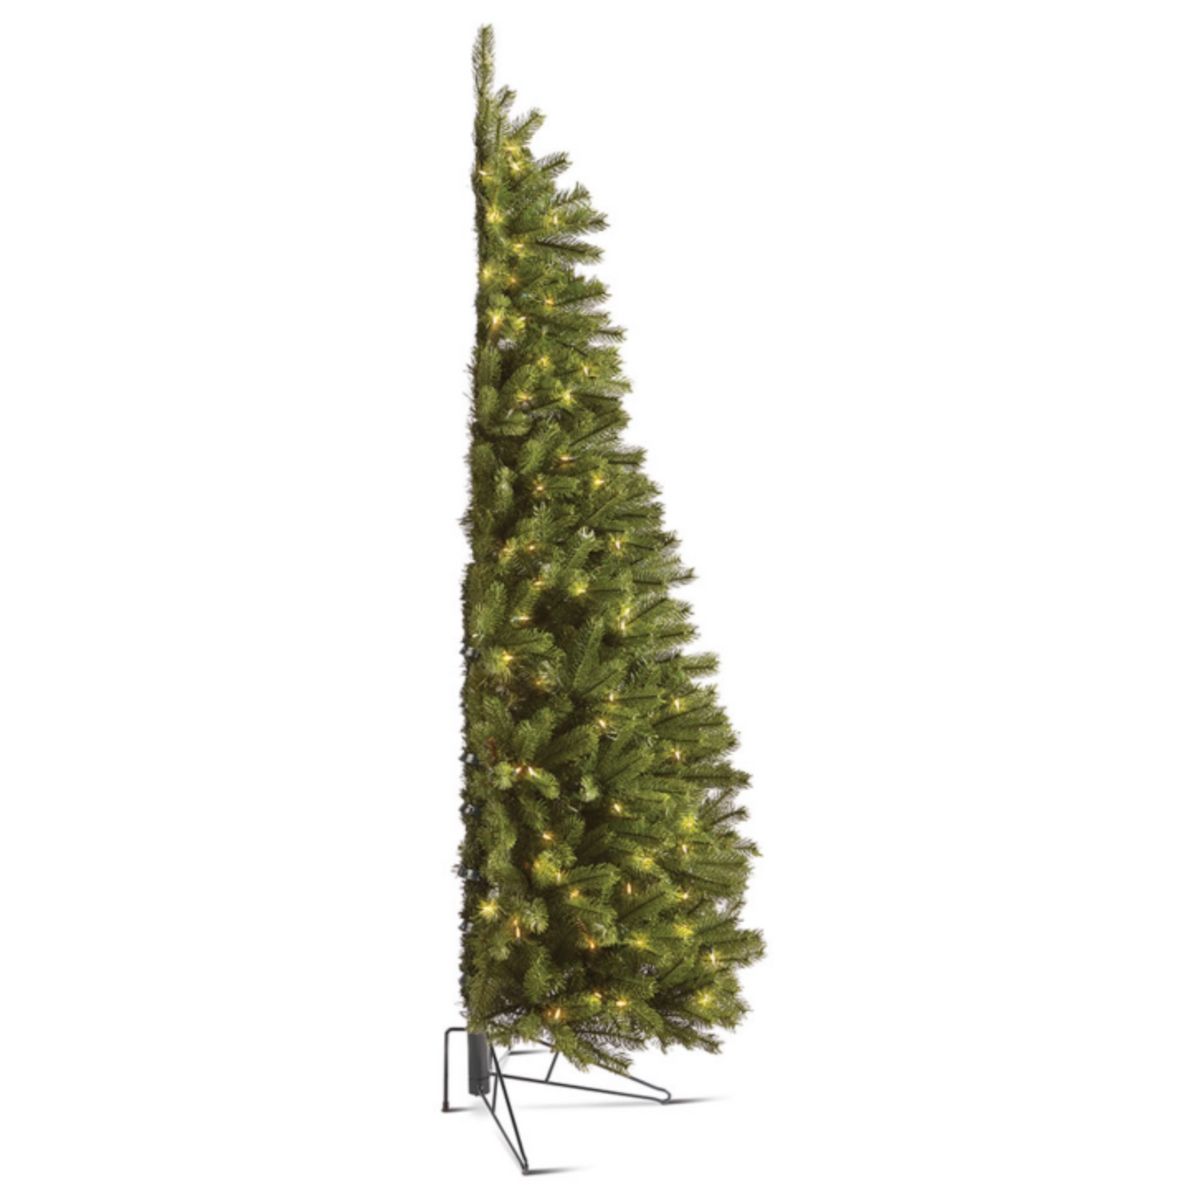 half-christmas trees exist for people who hate decorating the back